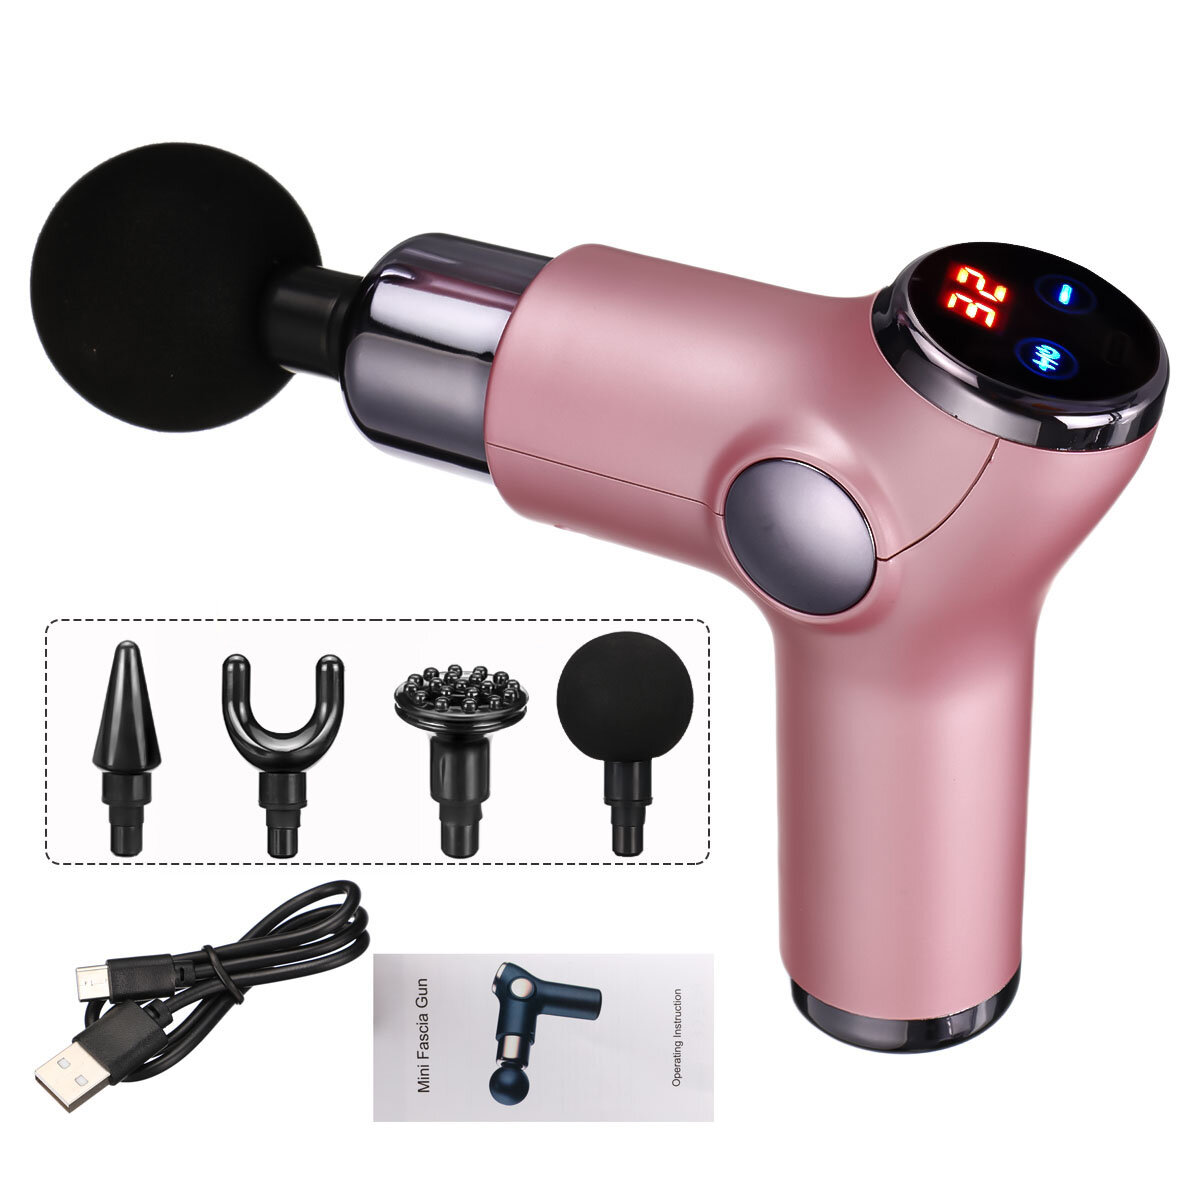 USB Electric Percussion Massage Guns HandHeld Deep Muscles Relaxing Shock Vibration Therapy Device Percussive Massager W/ 4 Heads